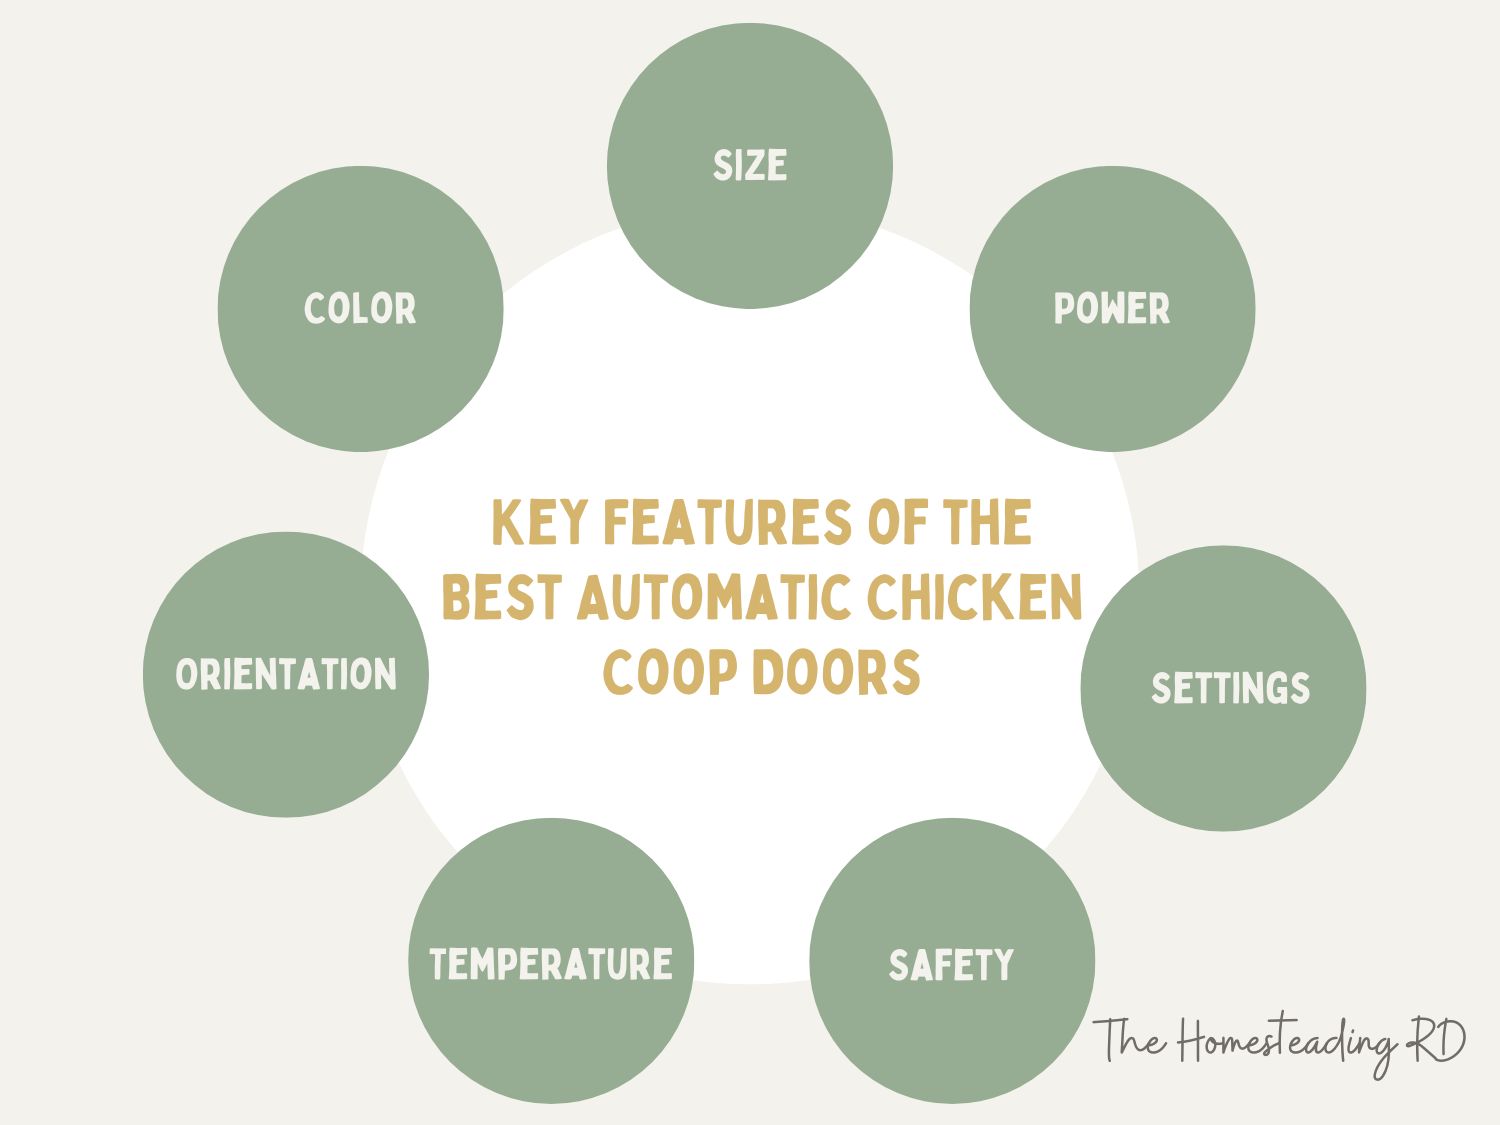 Canva illustration showing the features of the best automatic chicken coop doors